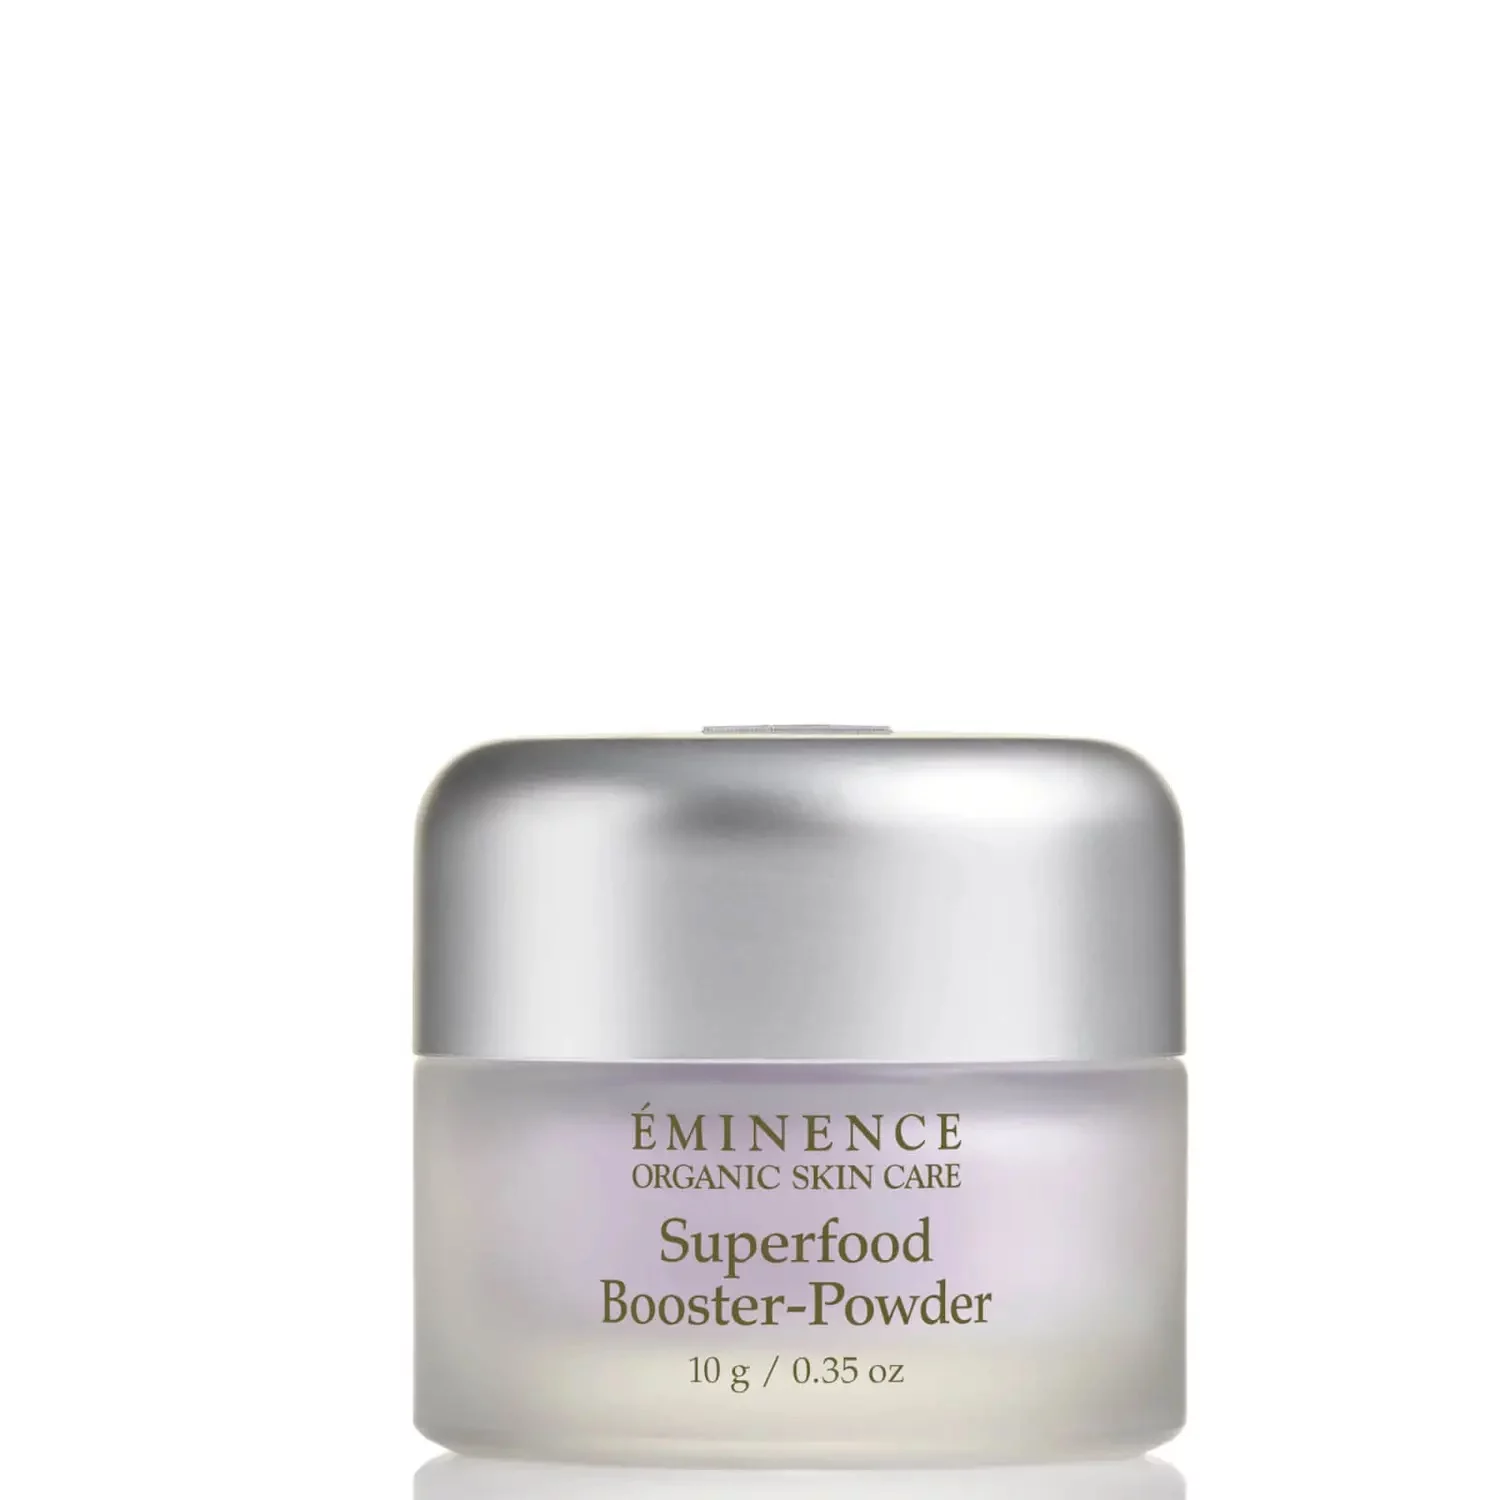 Eminence Organic Skin Care Superfood Booster-Powder